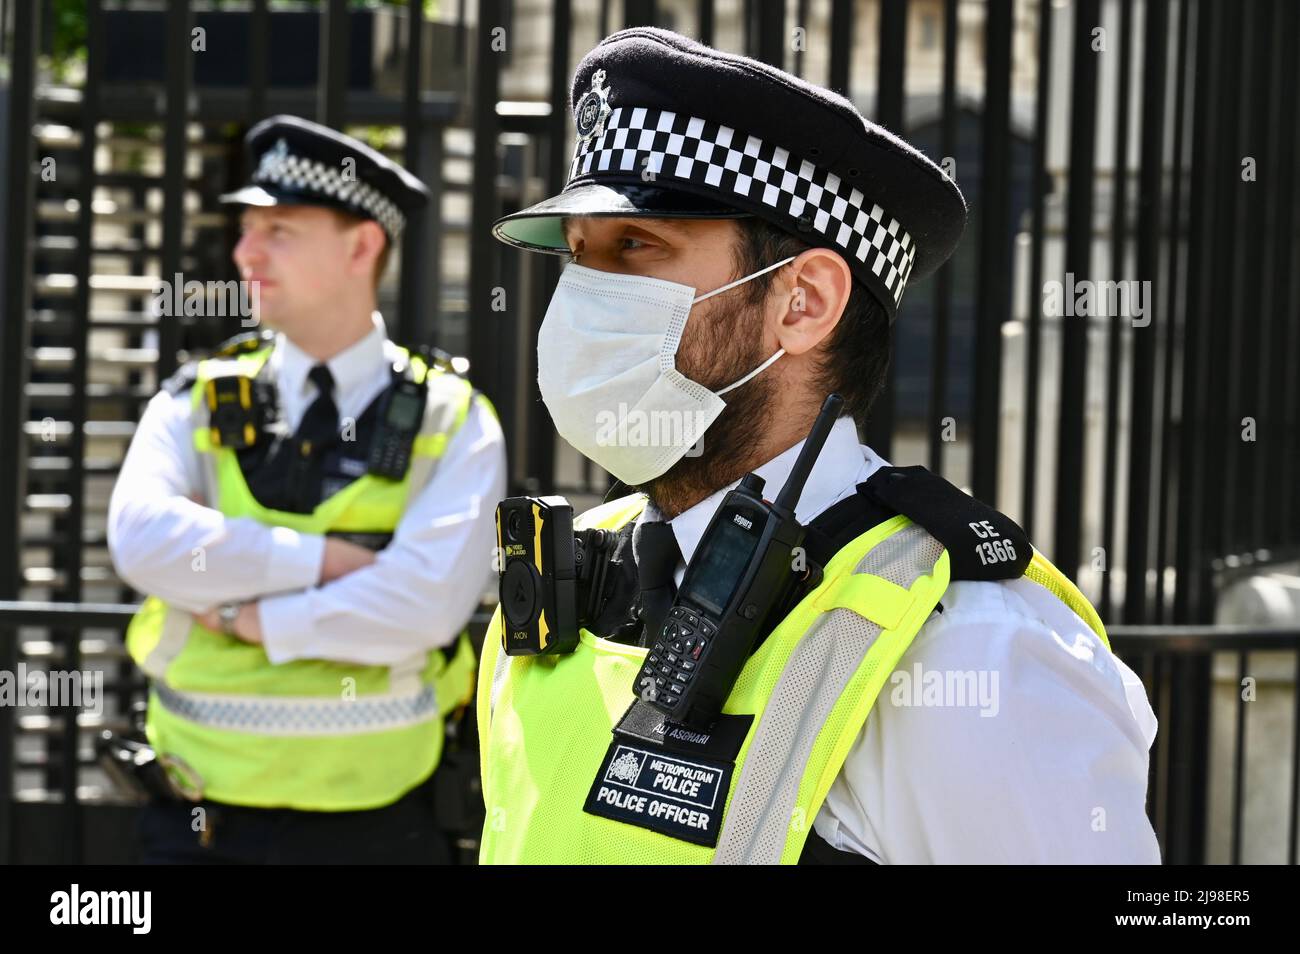 London, UK. Metropolitan Police Officers guarded the entrance to Downing Street. An Anti-Vax march took place in Central London today culminating in a rally outside the gates of 10 Downing Street. Stock Photo